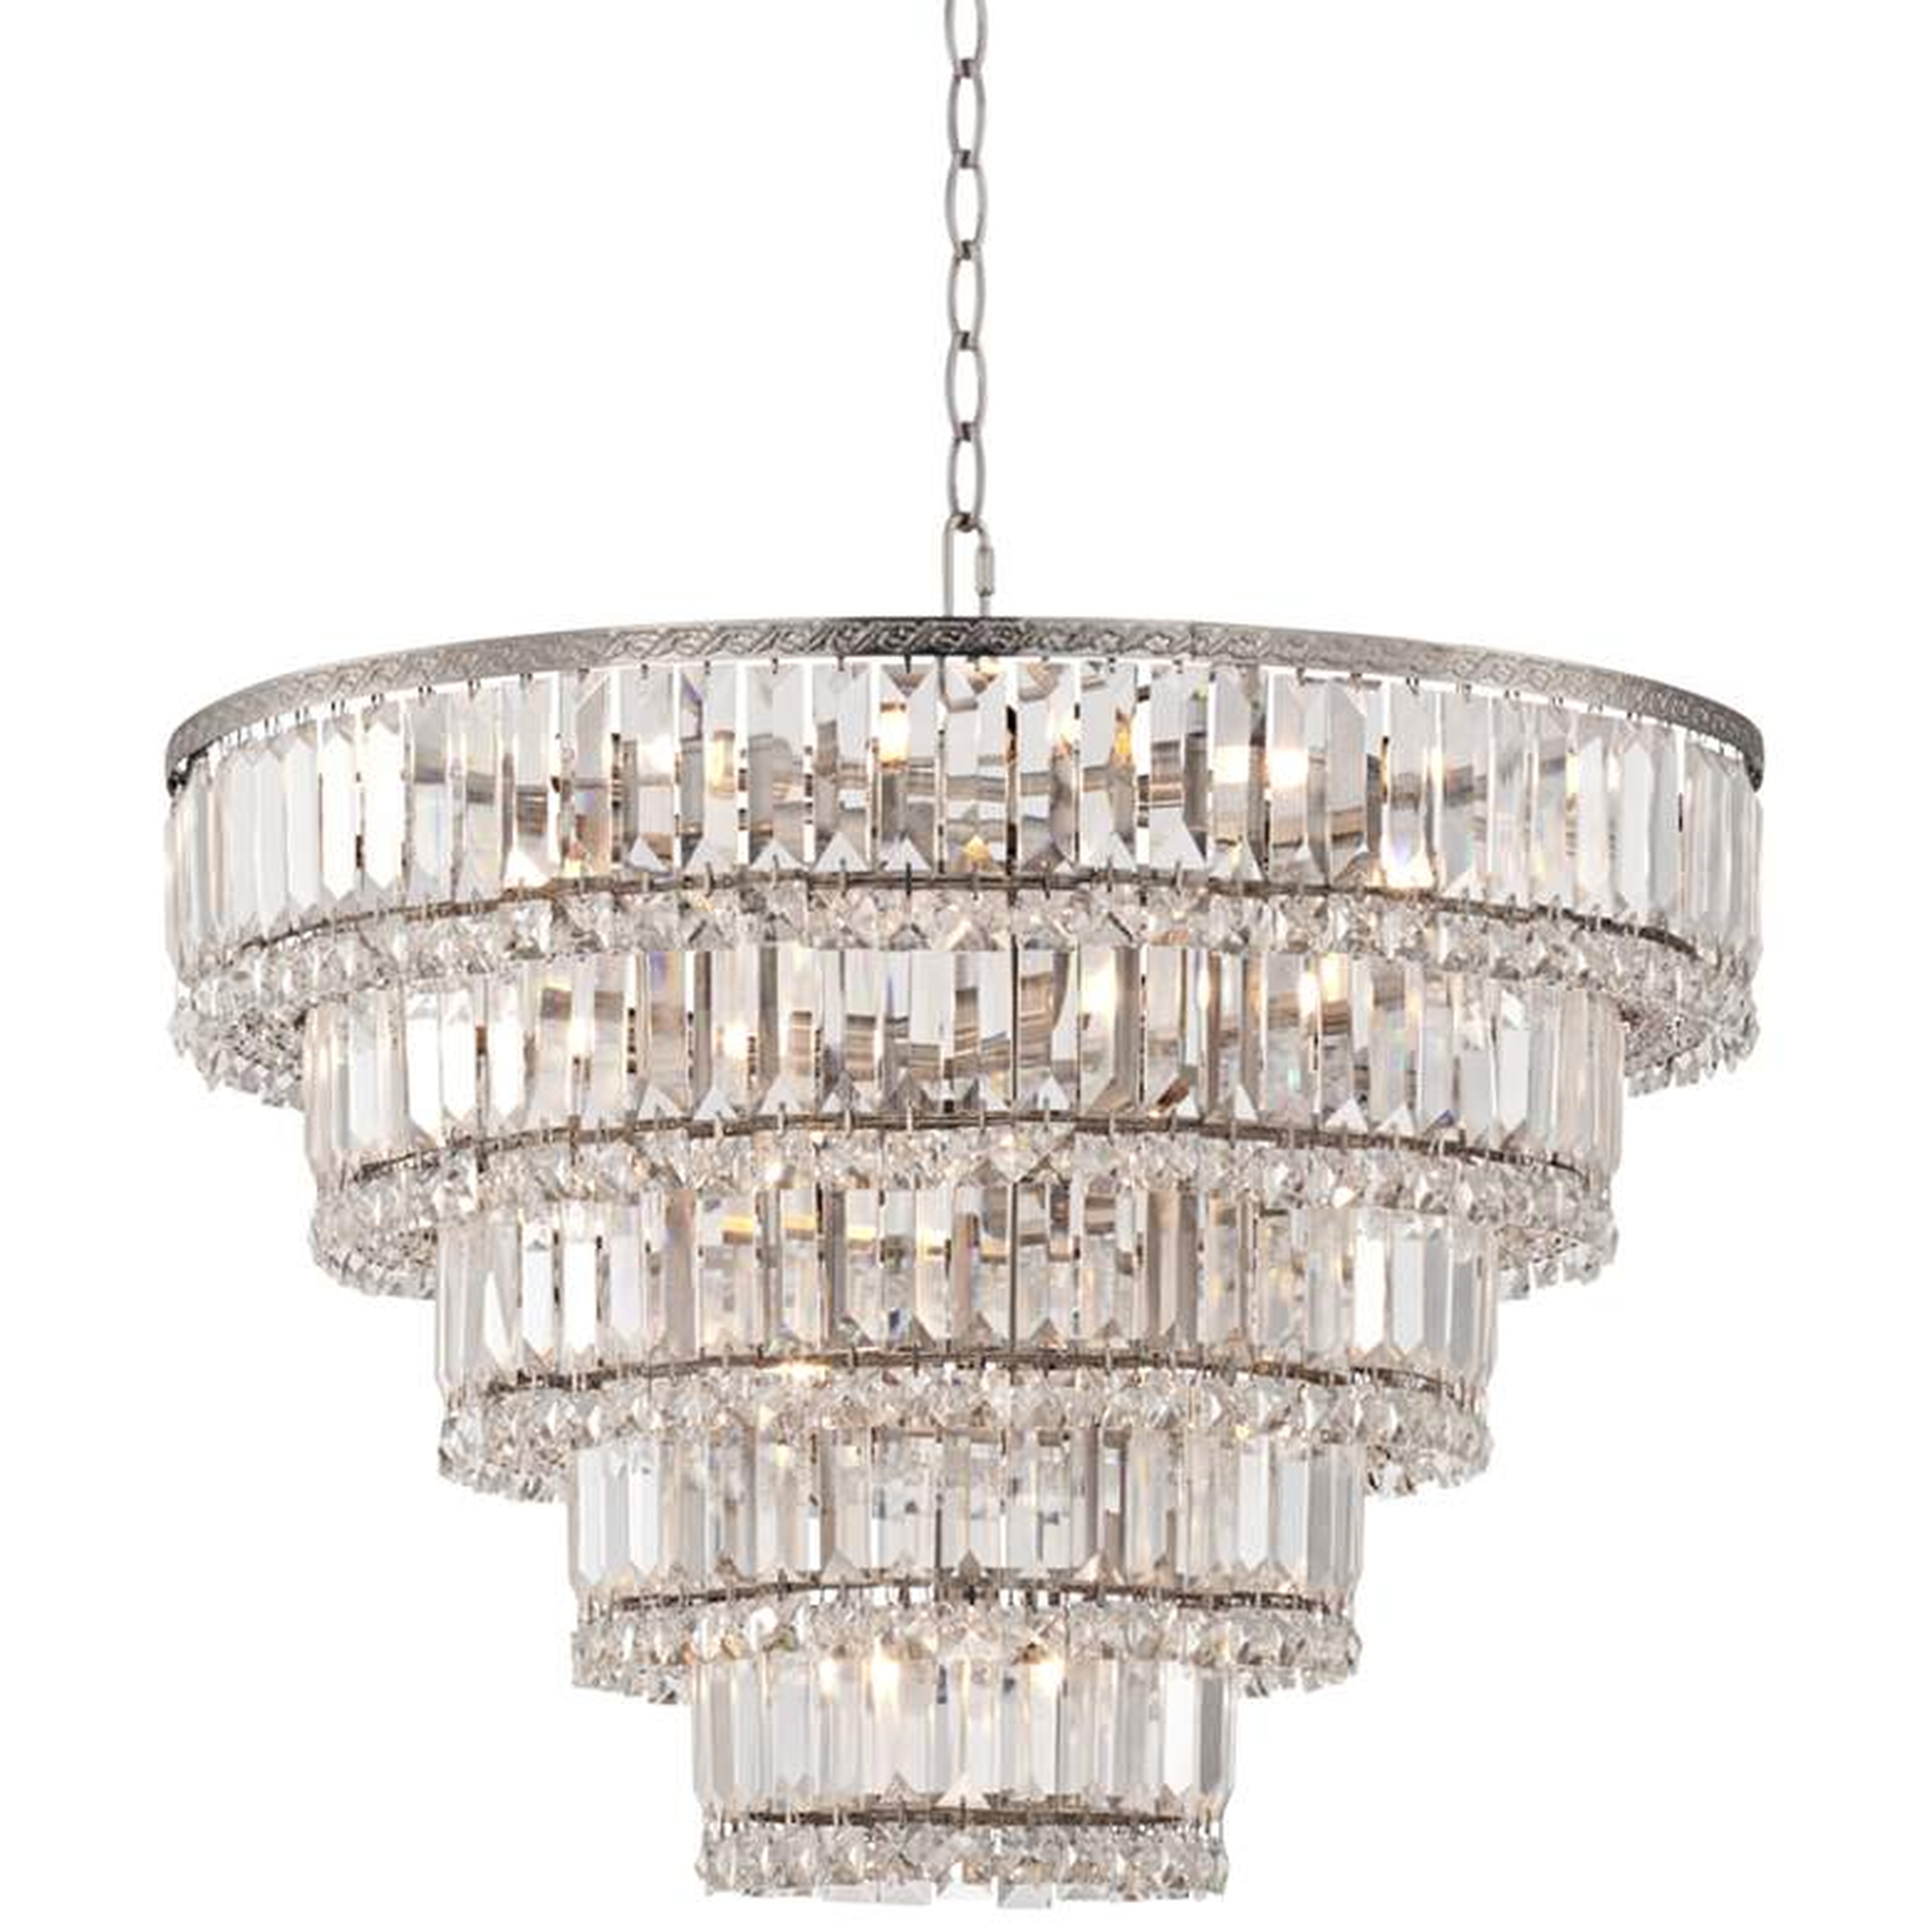 Magnificence Satin Nickel 24 1/2" Wide Crystal Ceiling Light - Lamps Plus